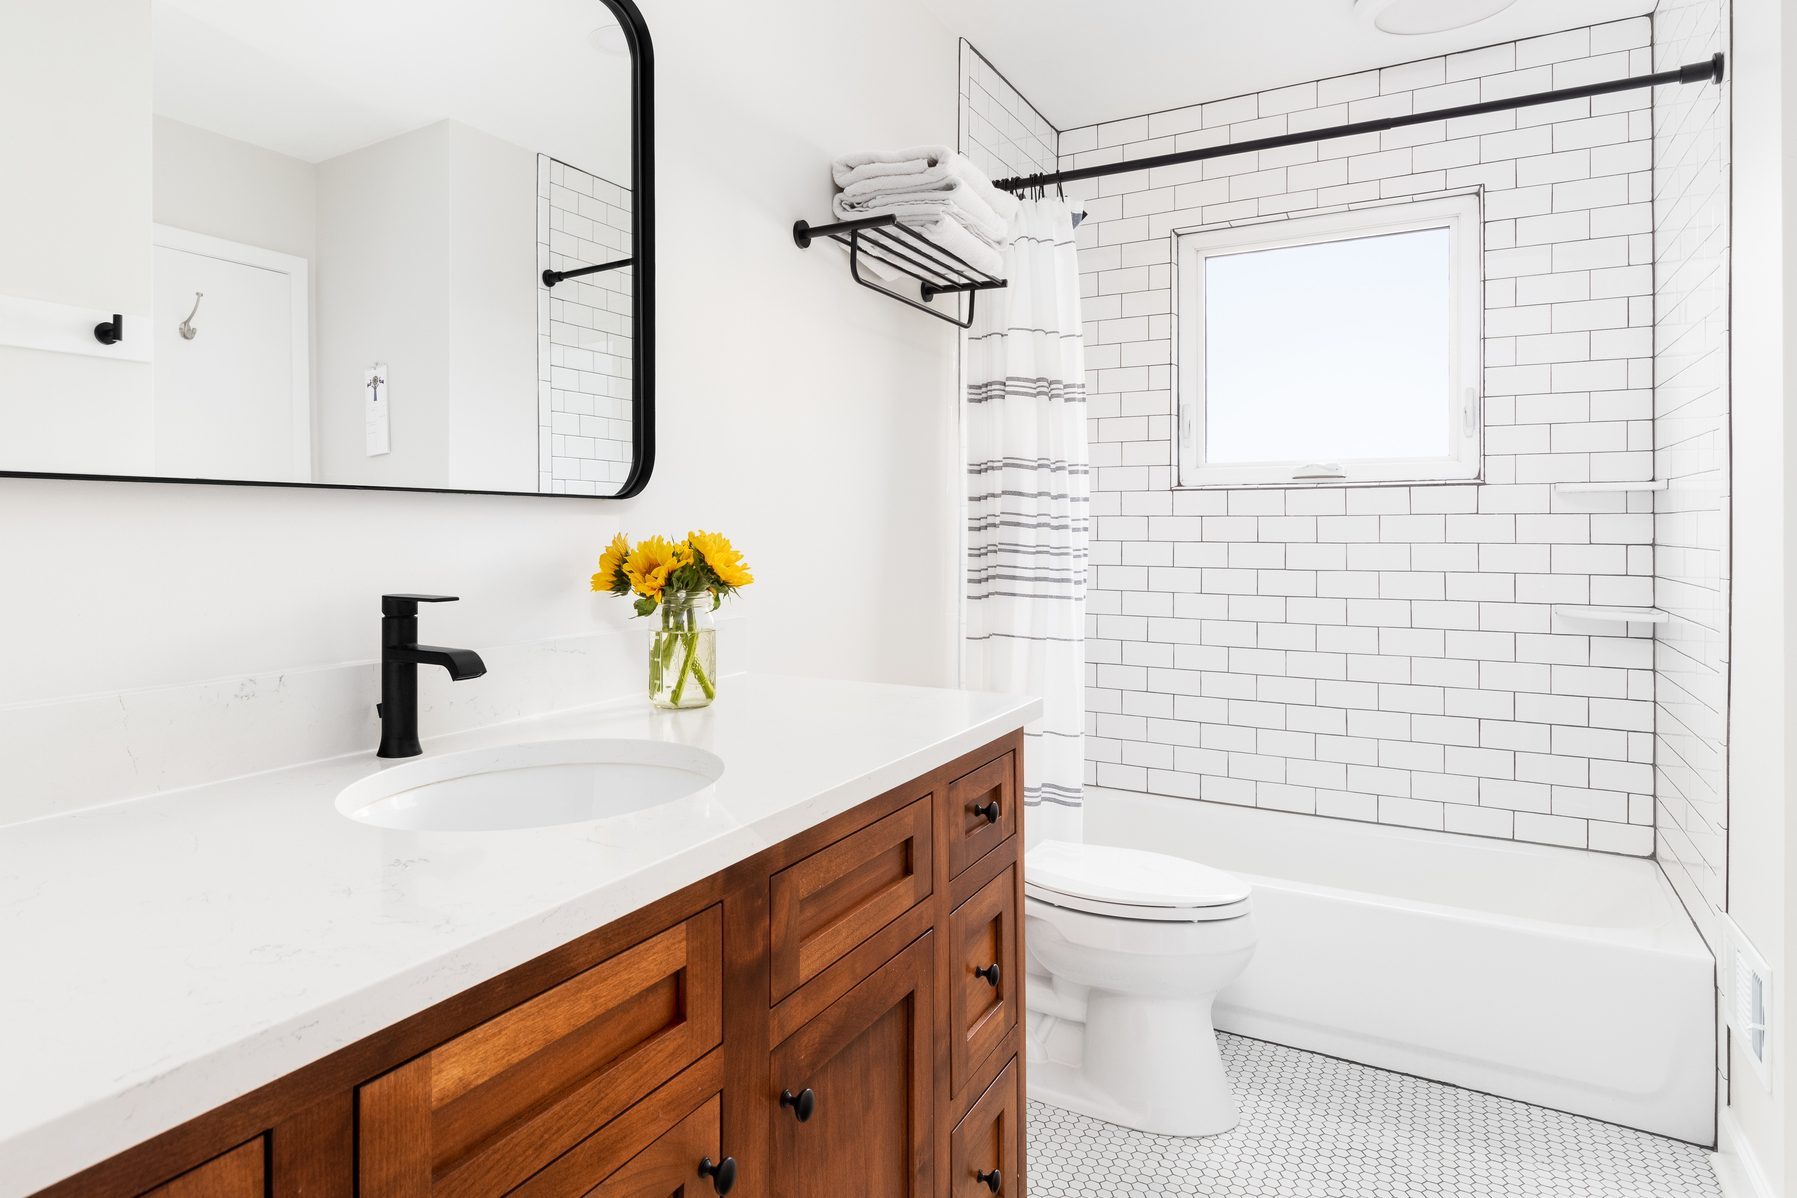 A farmhouse bathroom with a wood cabinet and subway tile shower.